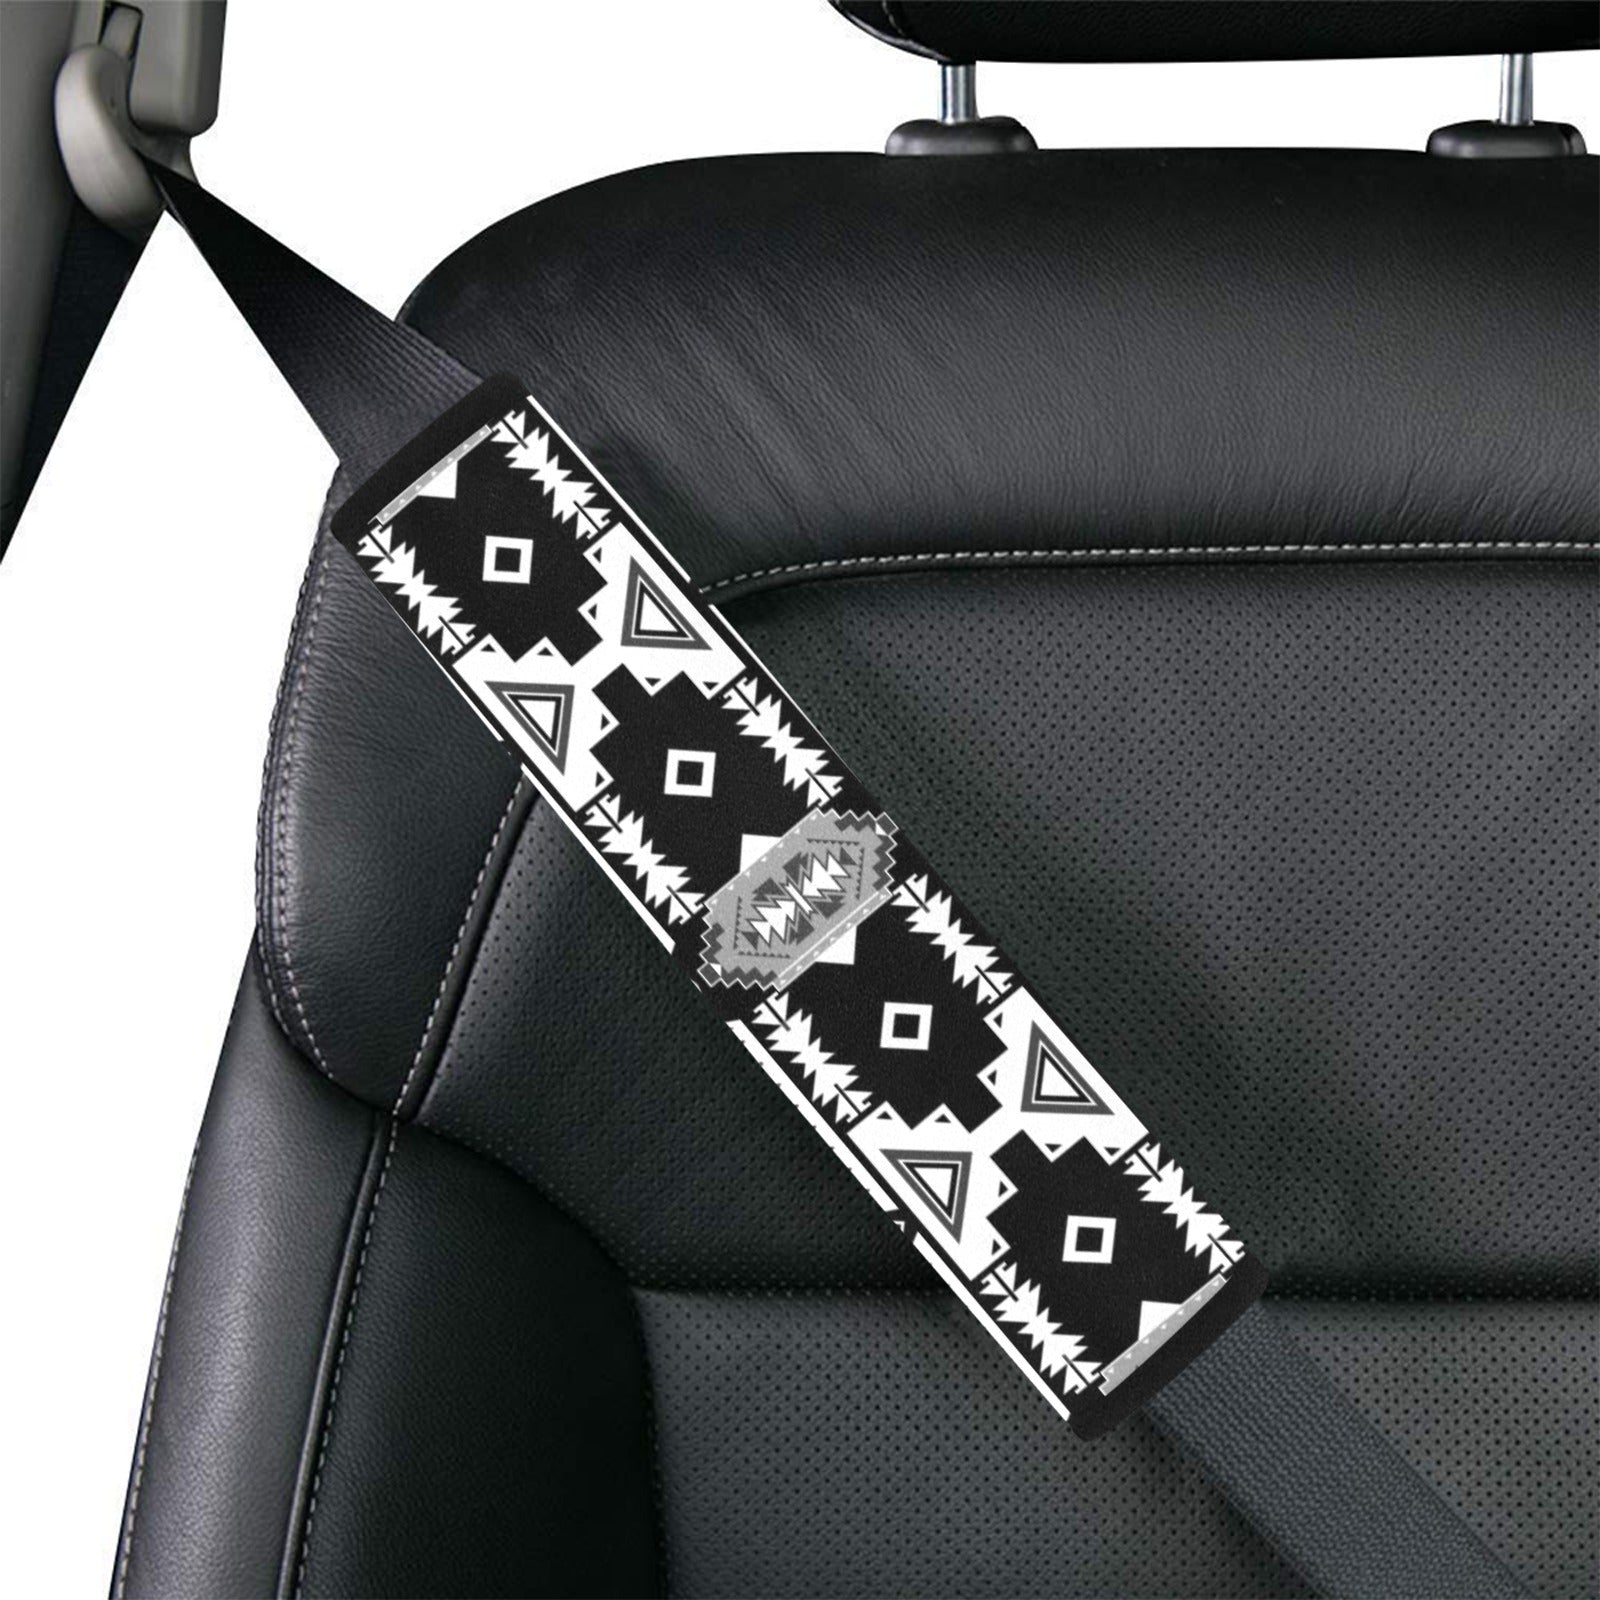 Chiefs Mountain Black and White Car Seat Belt Cover 7''x12.6'' (Pack of 2)